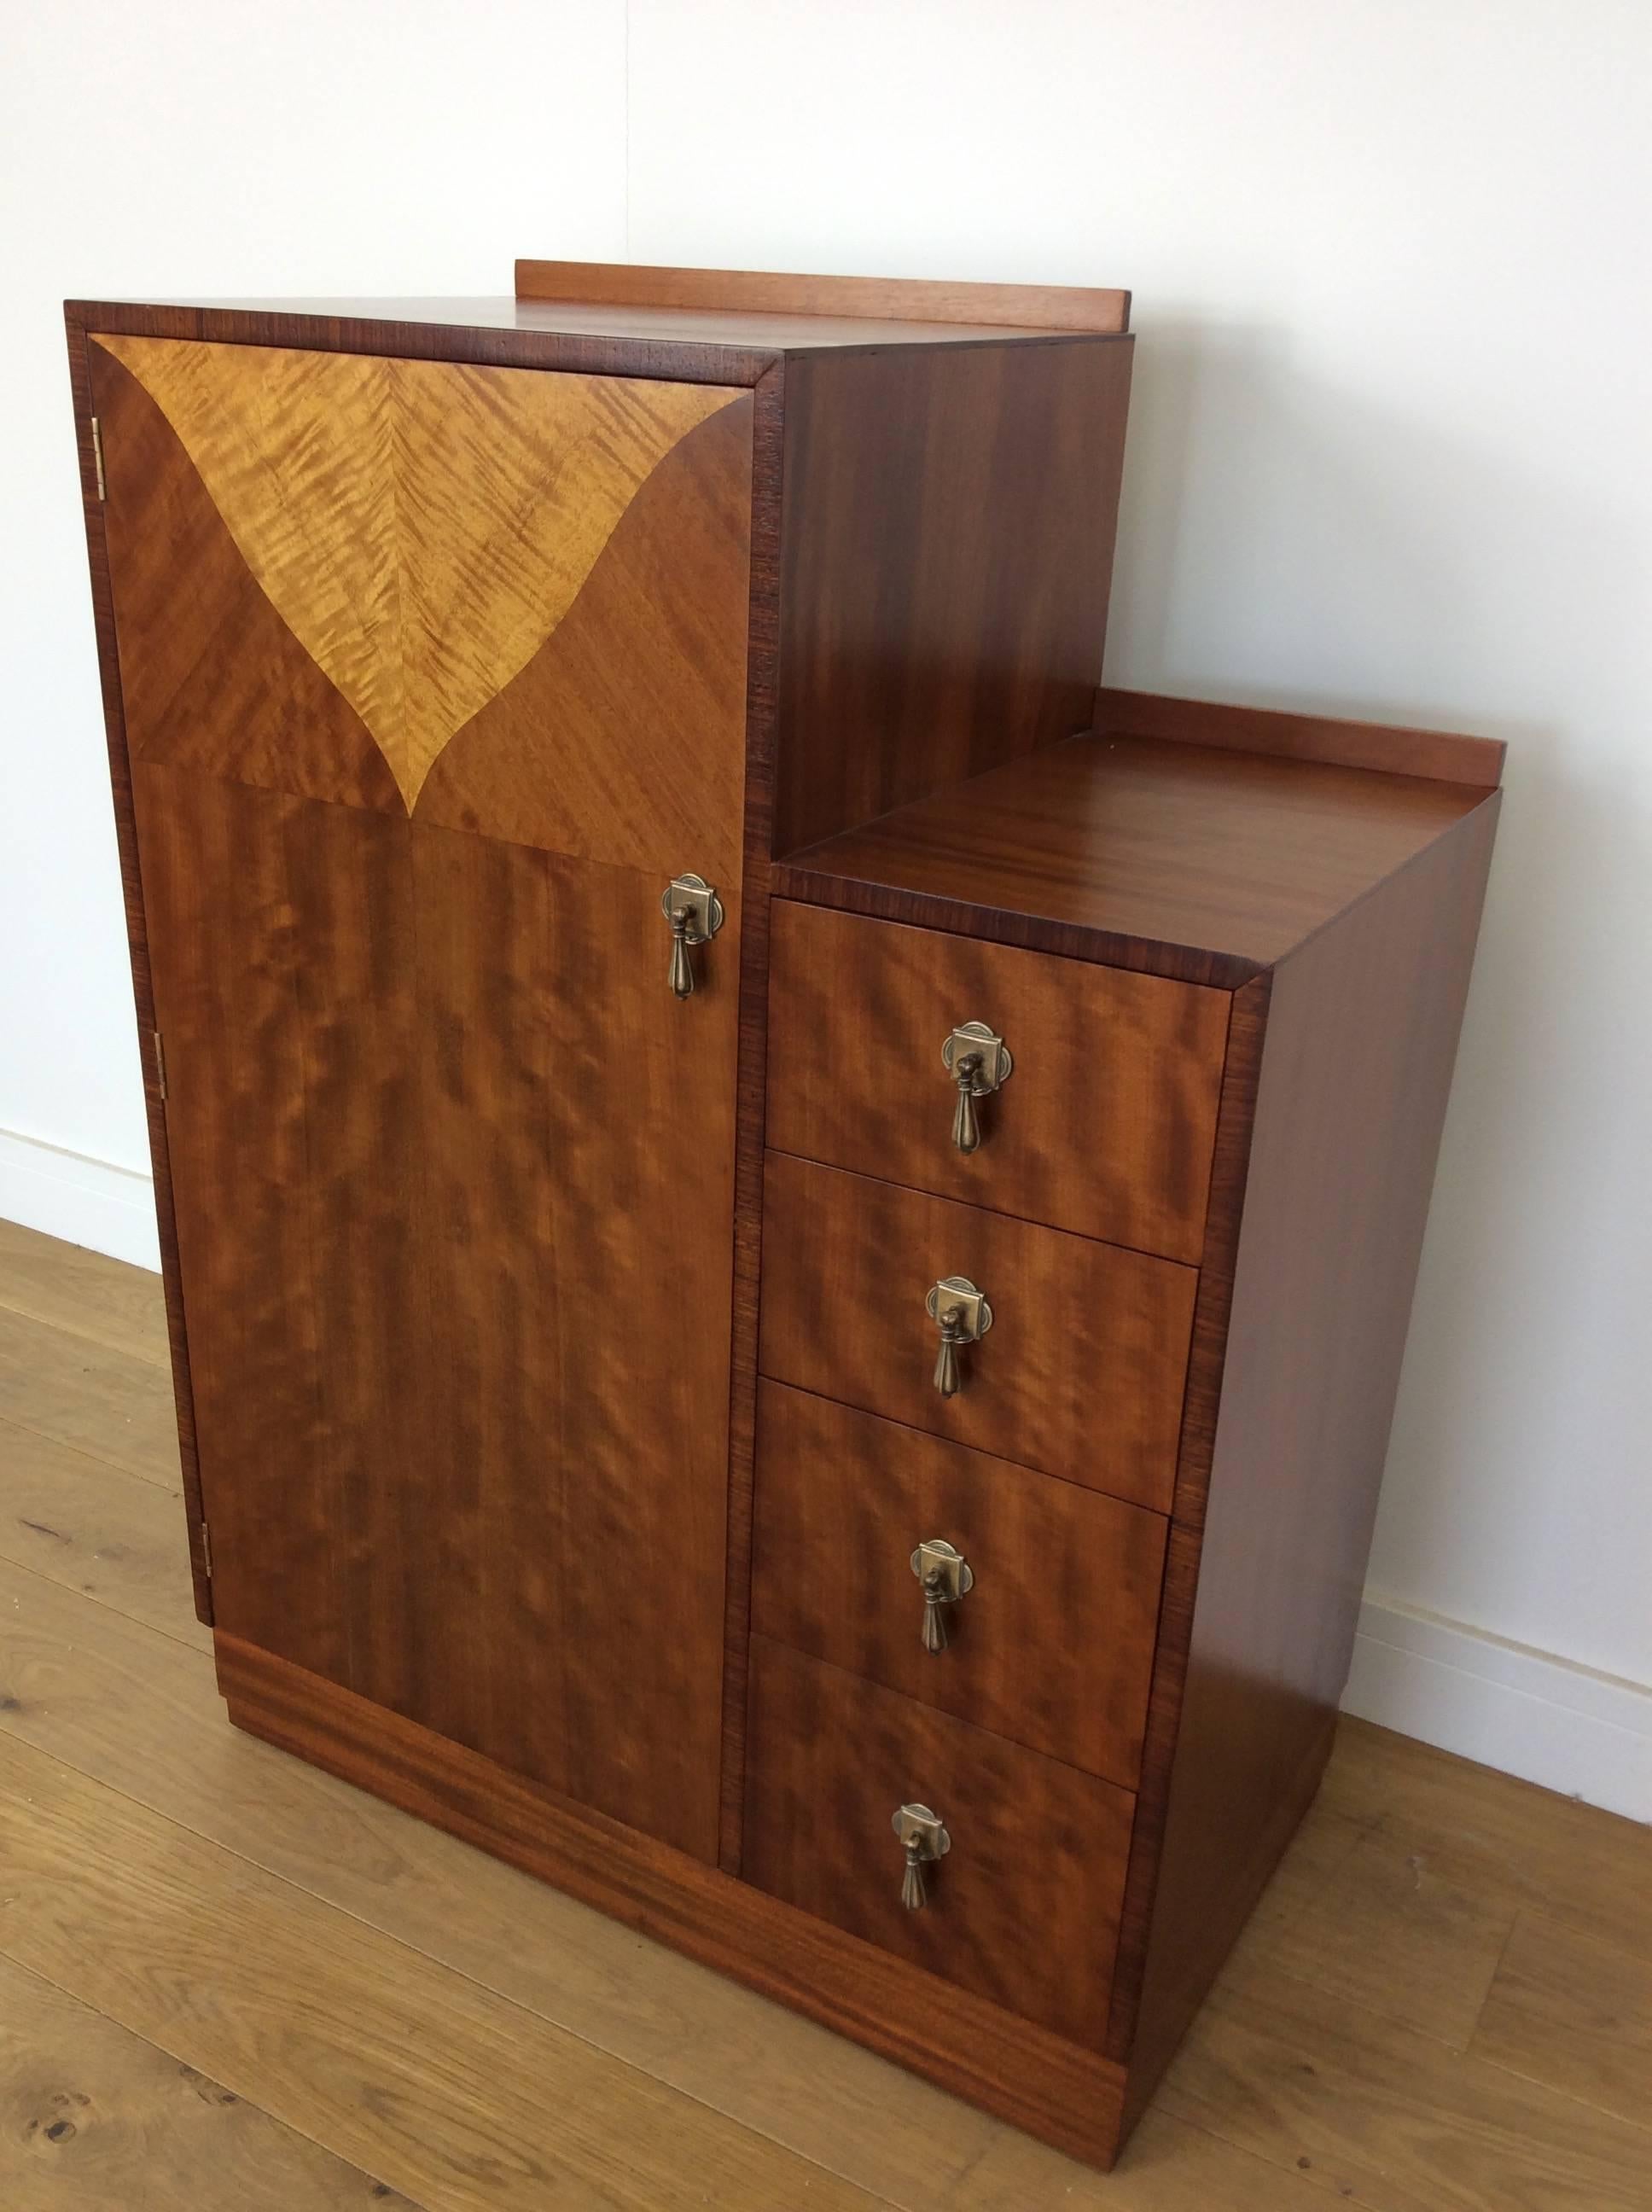 English Art Deco Bedroom Set in Satin Maple by Maple & Co.